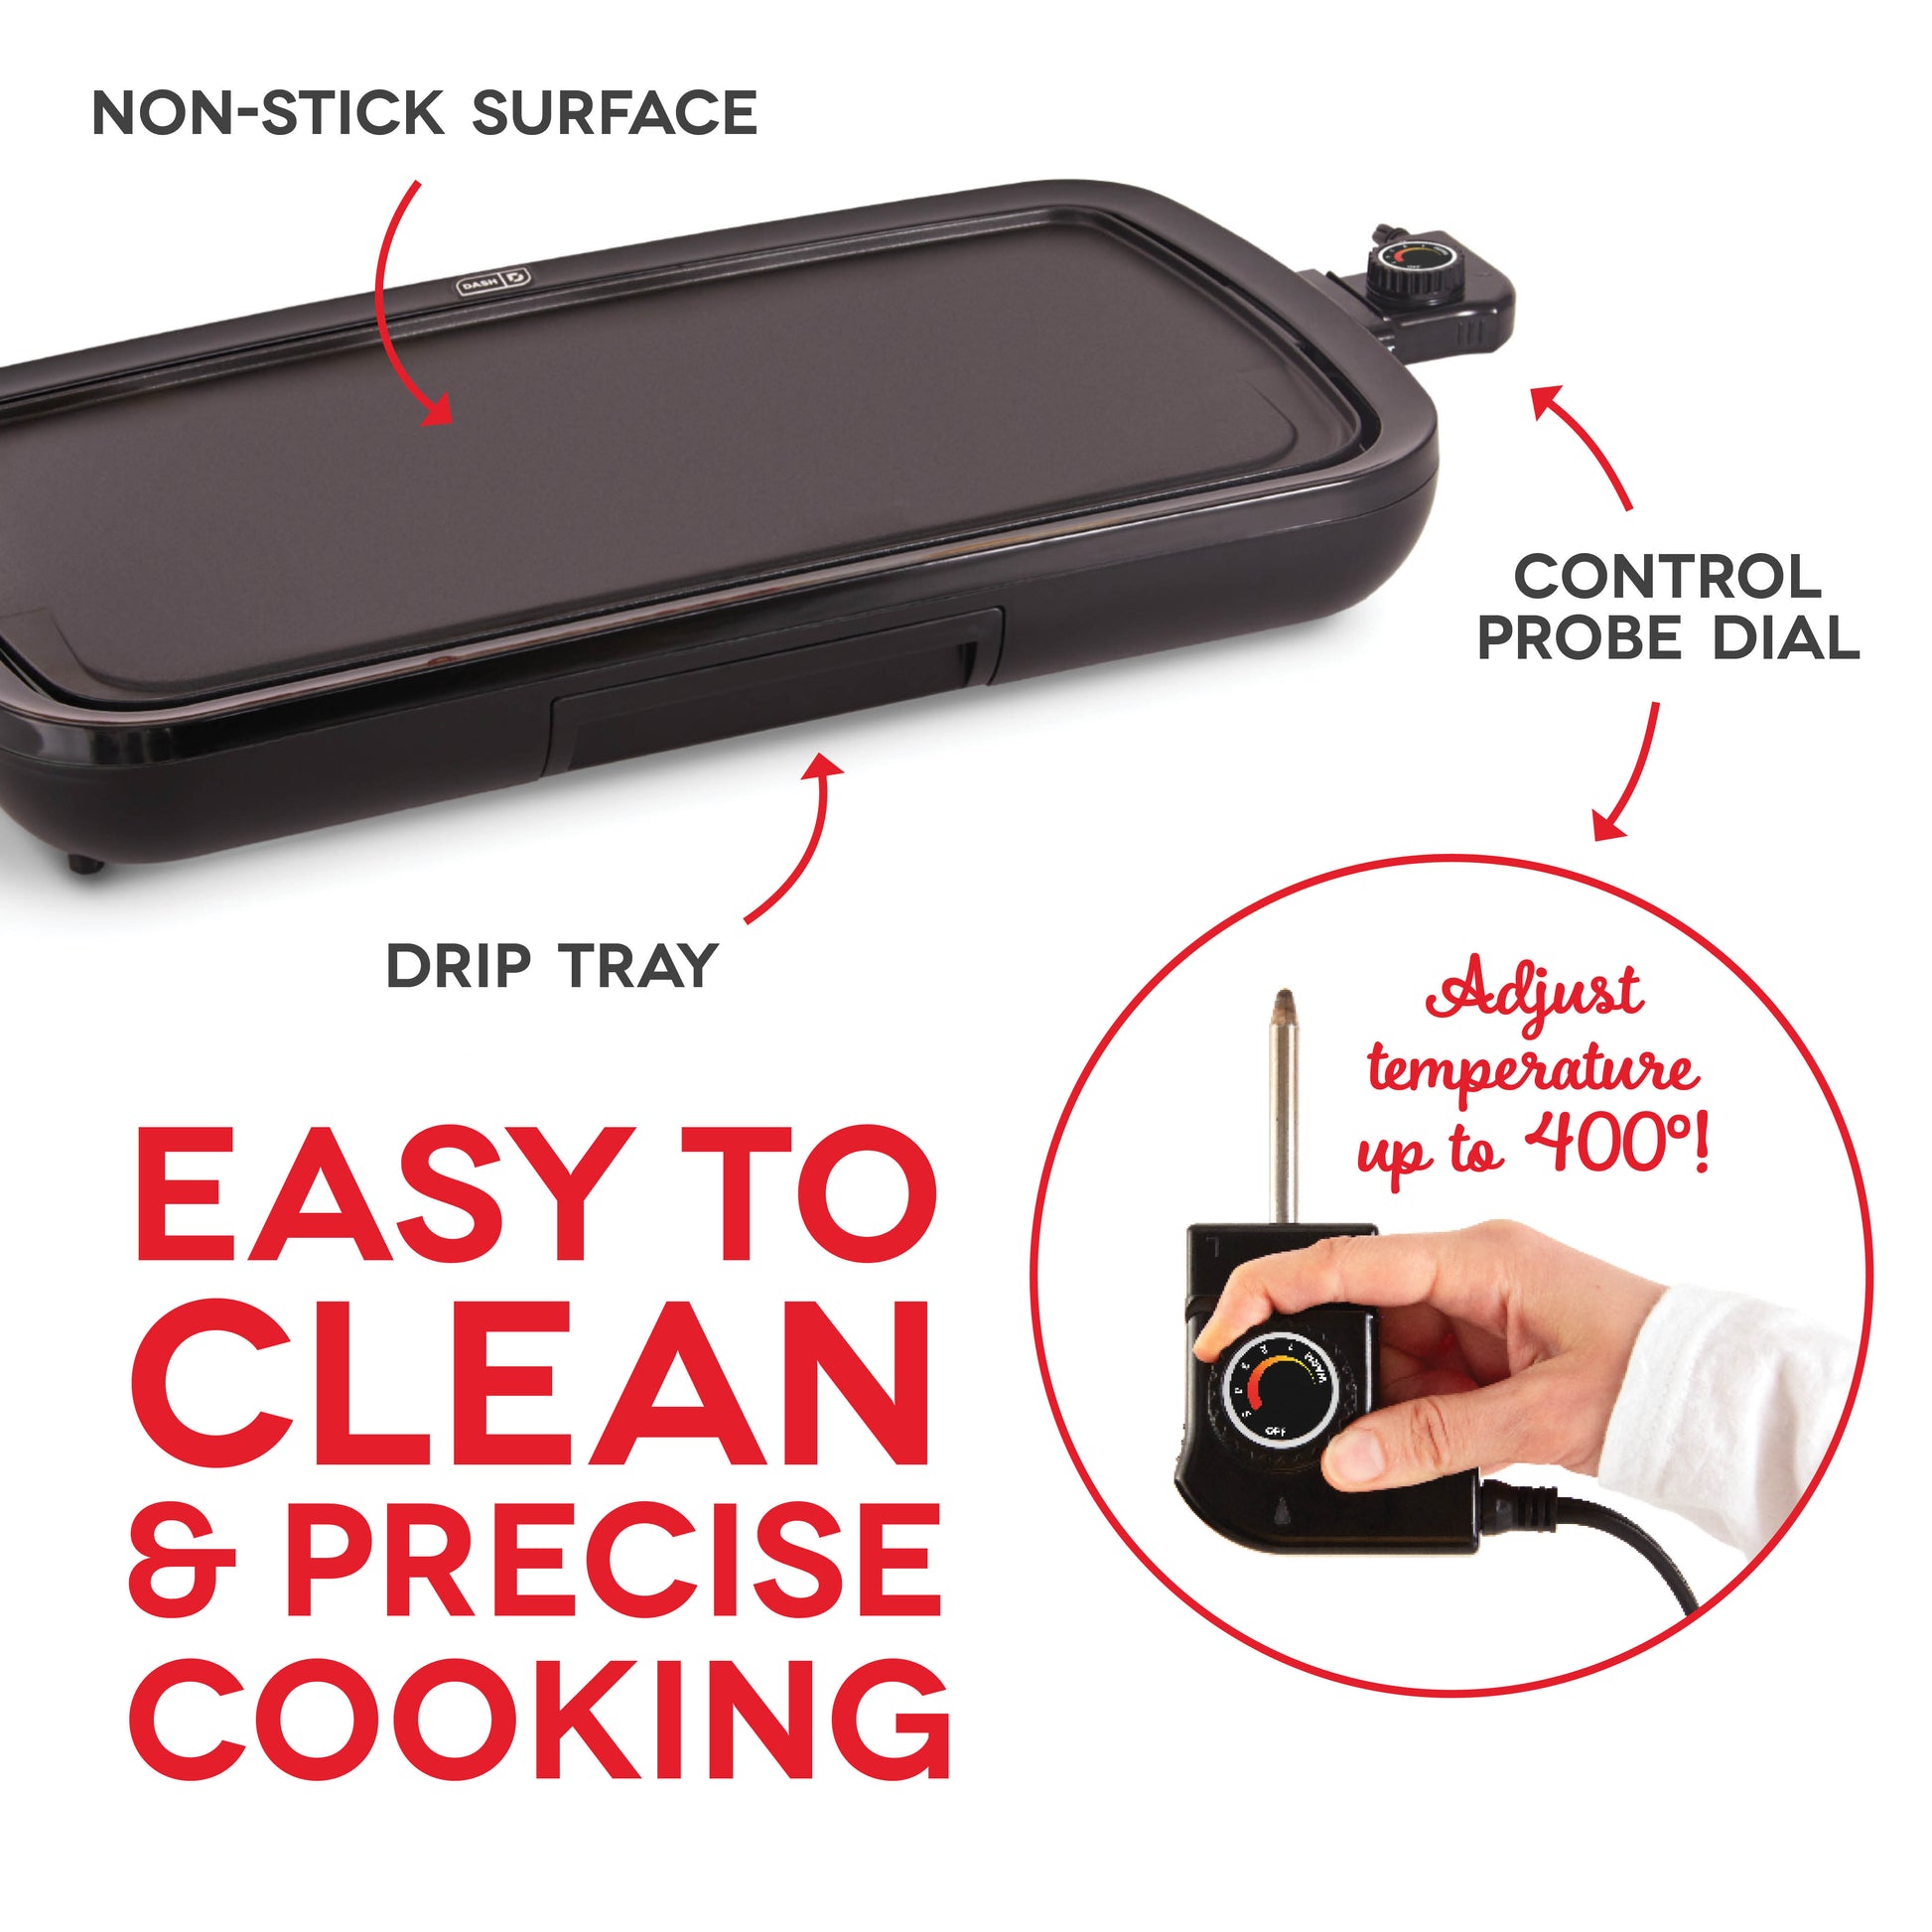 Dash Everyday Nonstick Electric Griddle For Pancakes Burgers, Quesadillas,  Eggs Other On The Go Breakfast, Lunch Snacks With Drip Tray Included, Dash  Griddle Inch